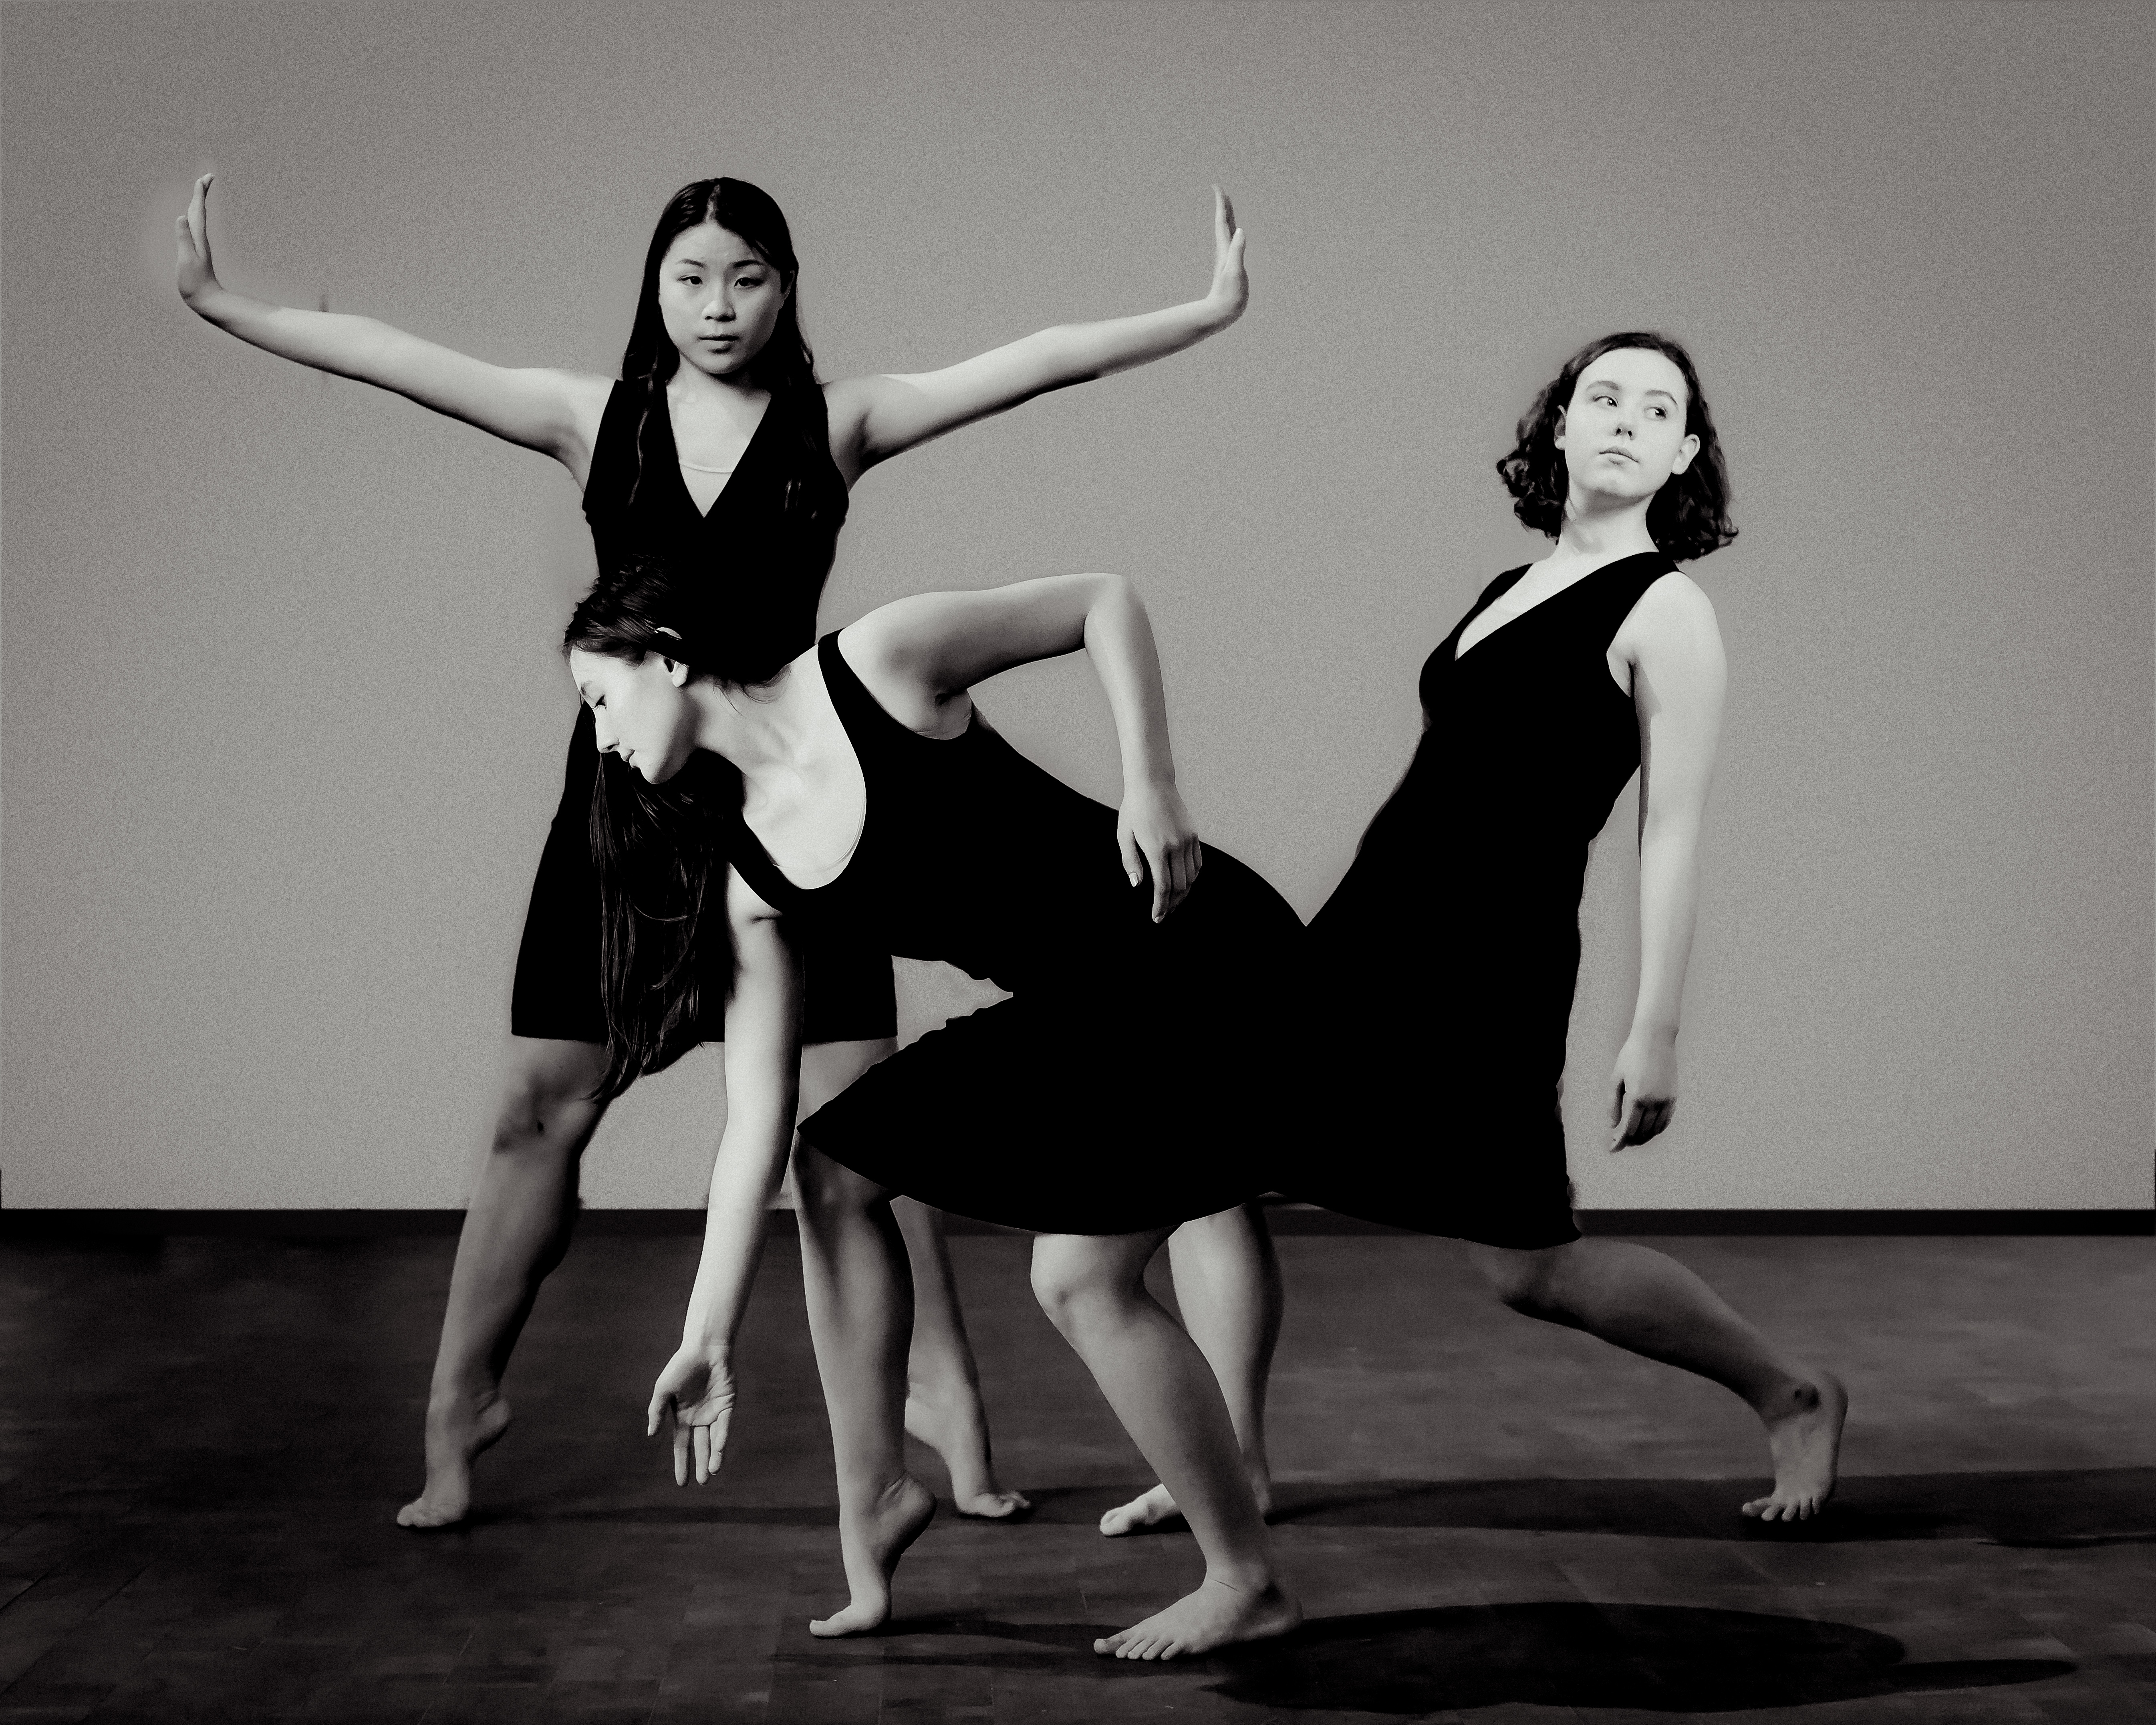 3 dancers close together in dramatic poses